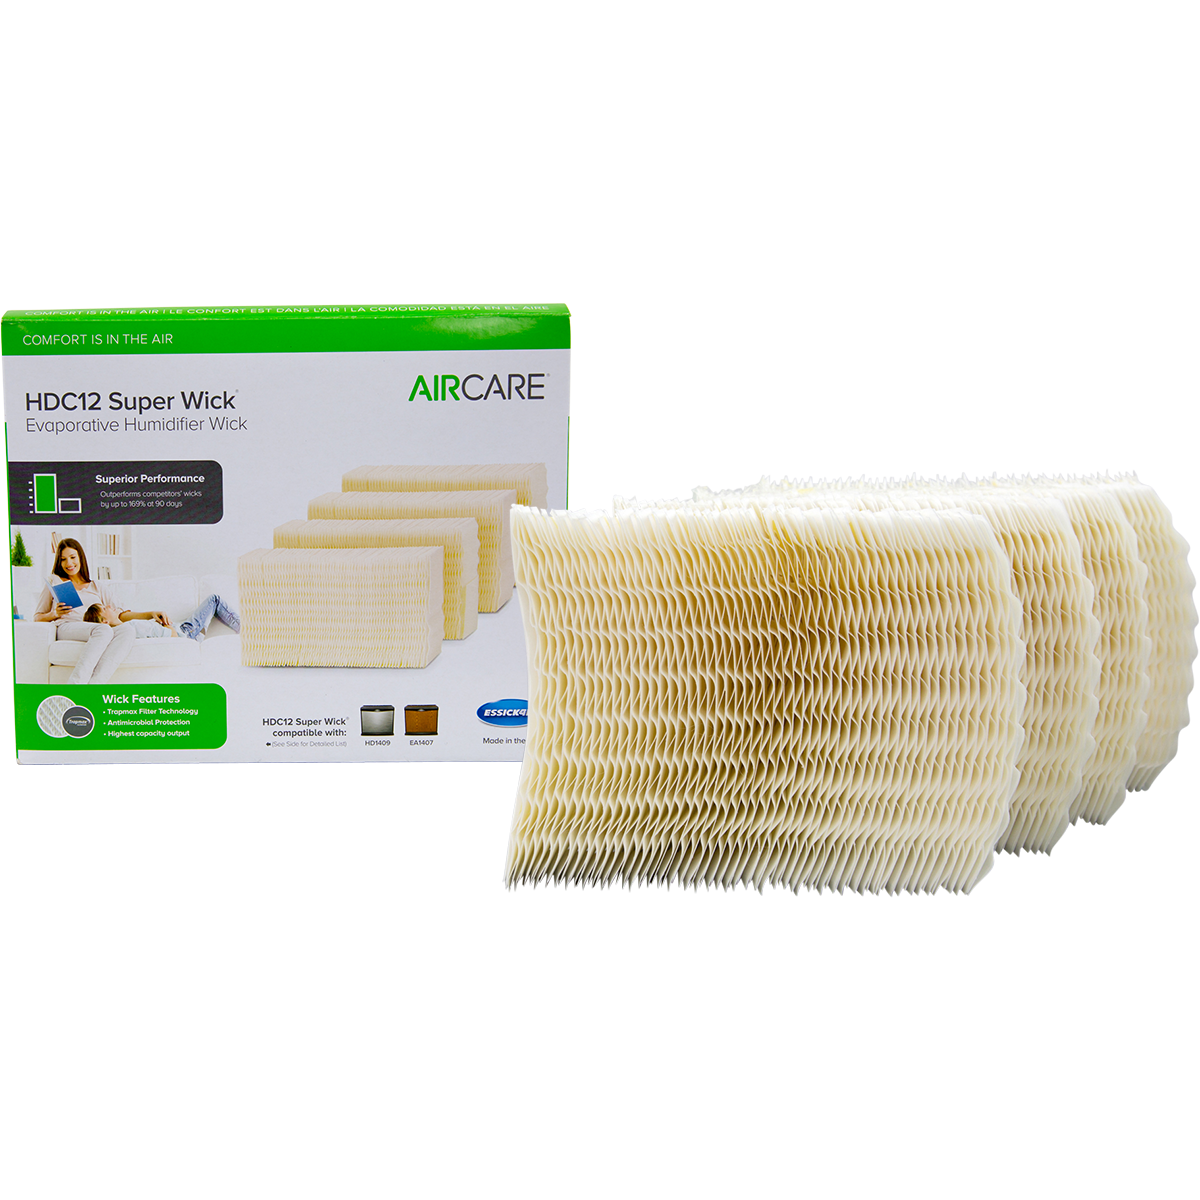 24 PACK Humidifier Filter for AIRCARE HDC12 Super Wick